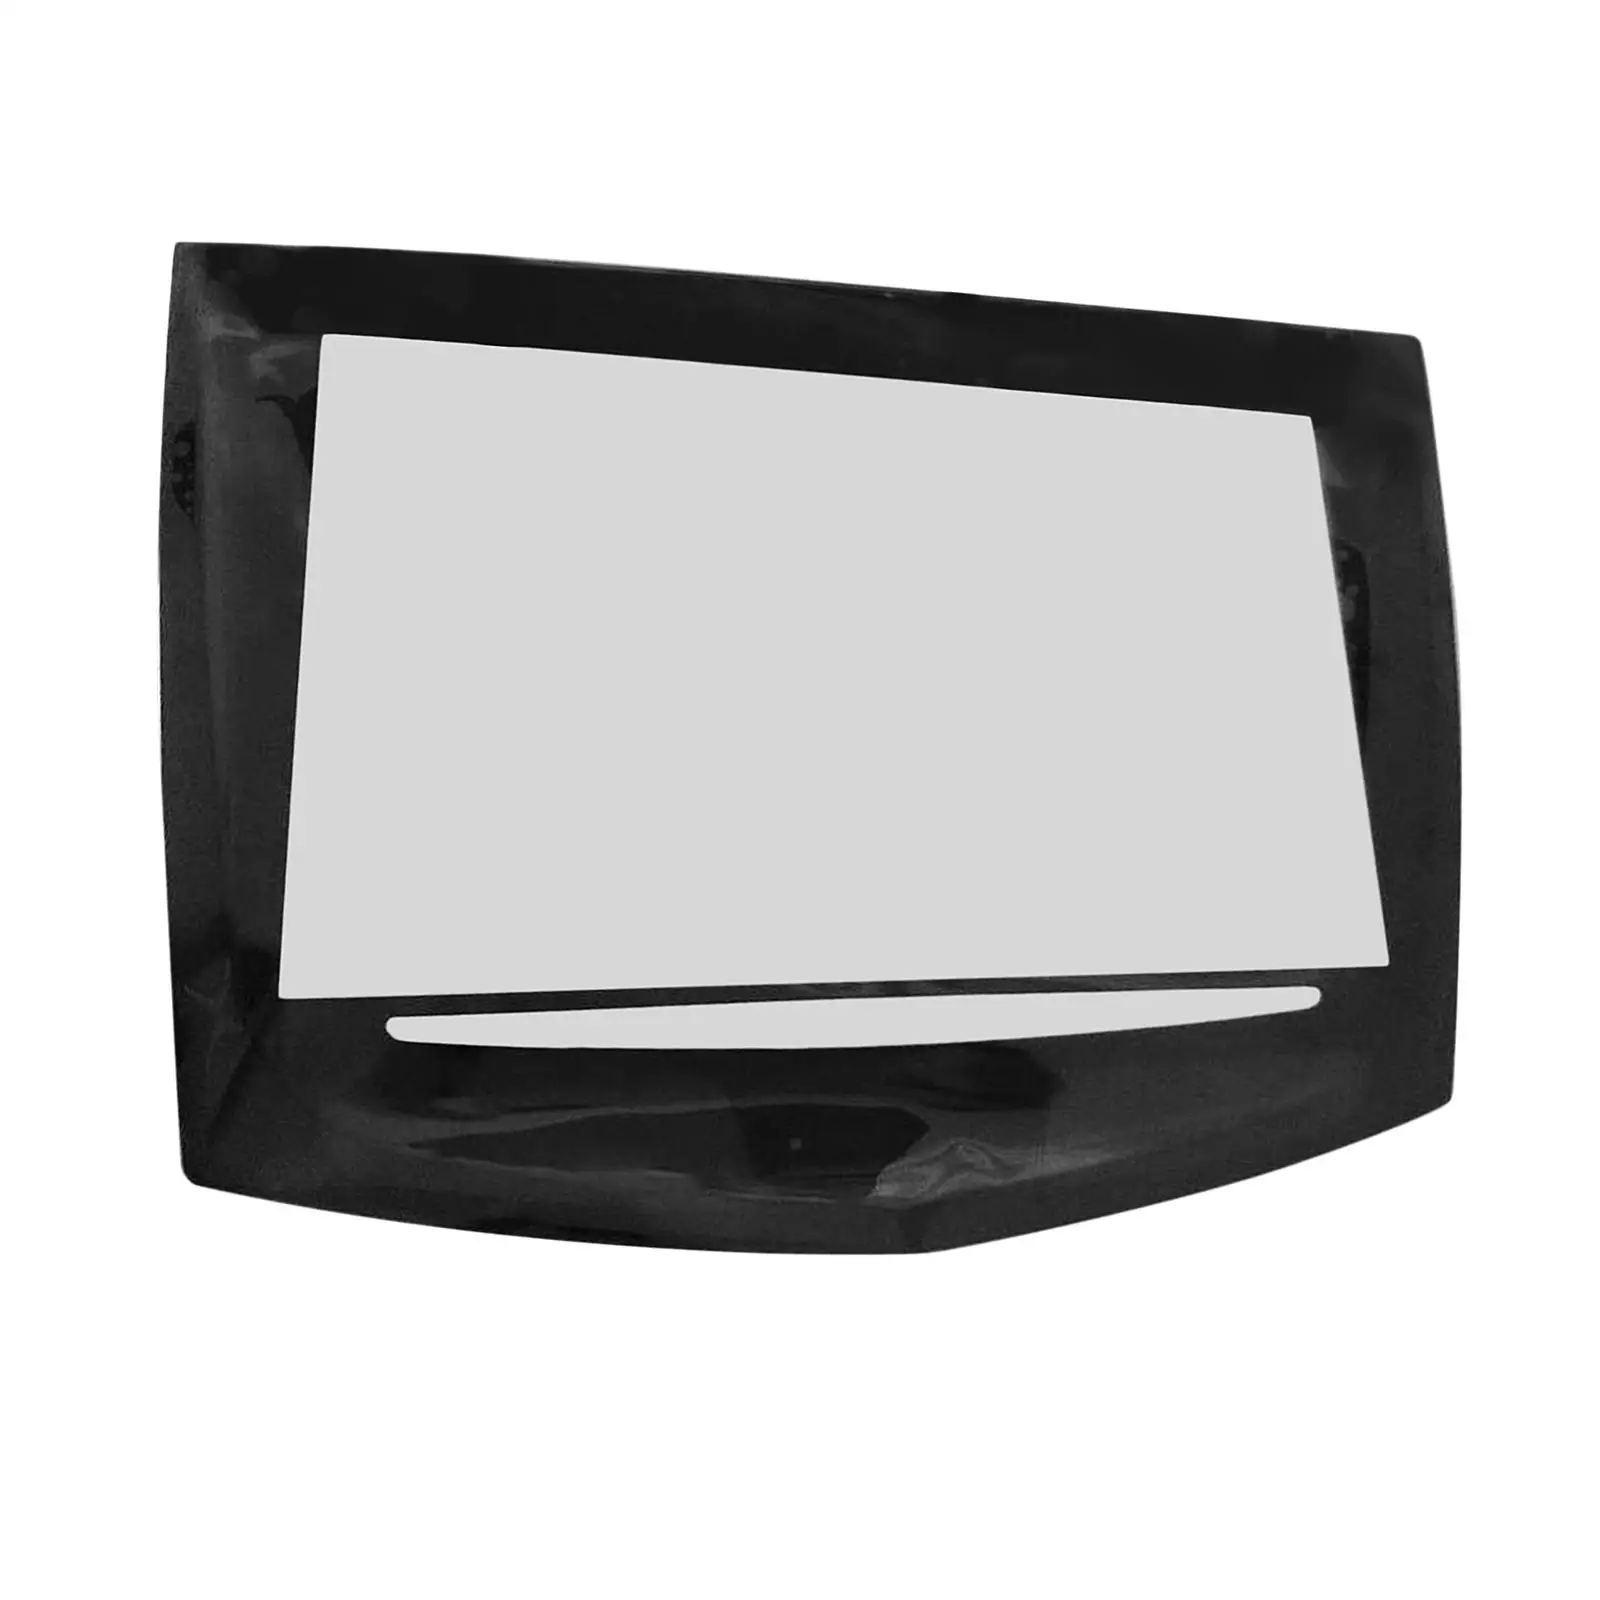 Touch Screen Display Glass Assembly Screen Digitizer Fit for Cadillac Escalade 18-21 84232093 Automobile Parts Auto Parts